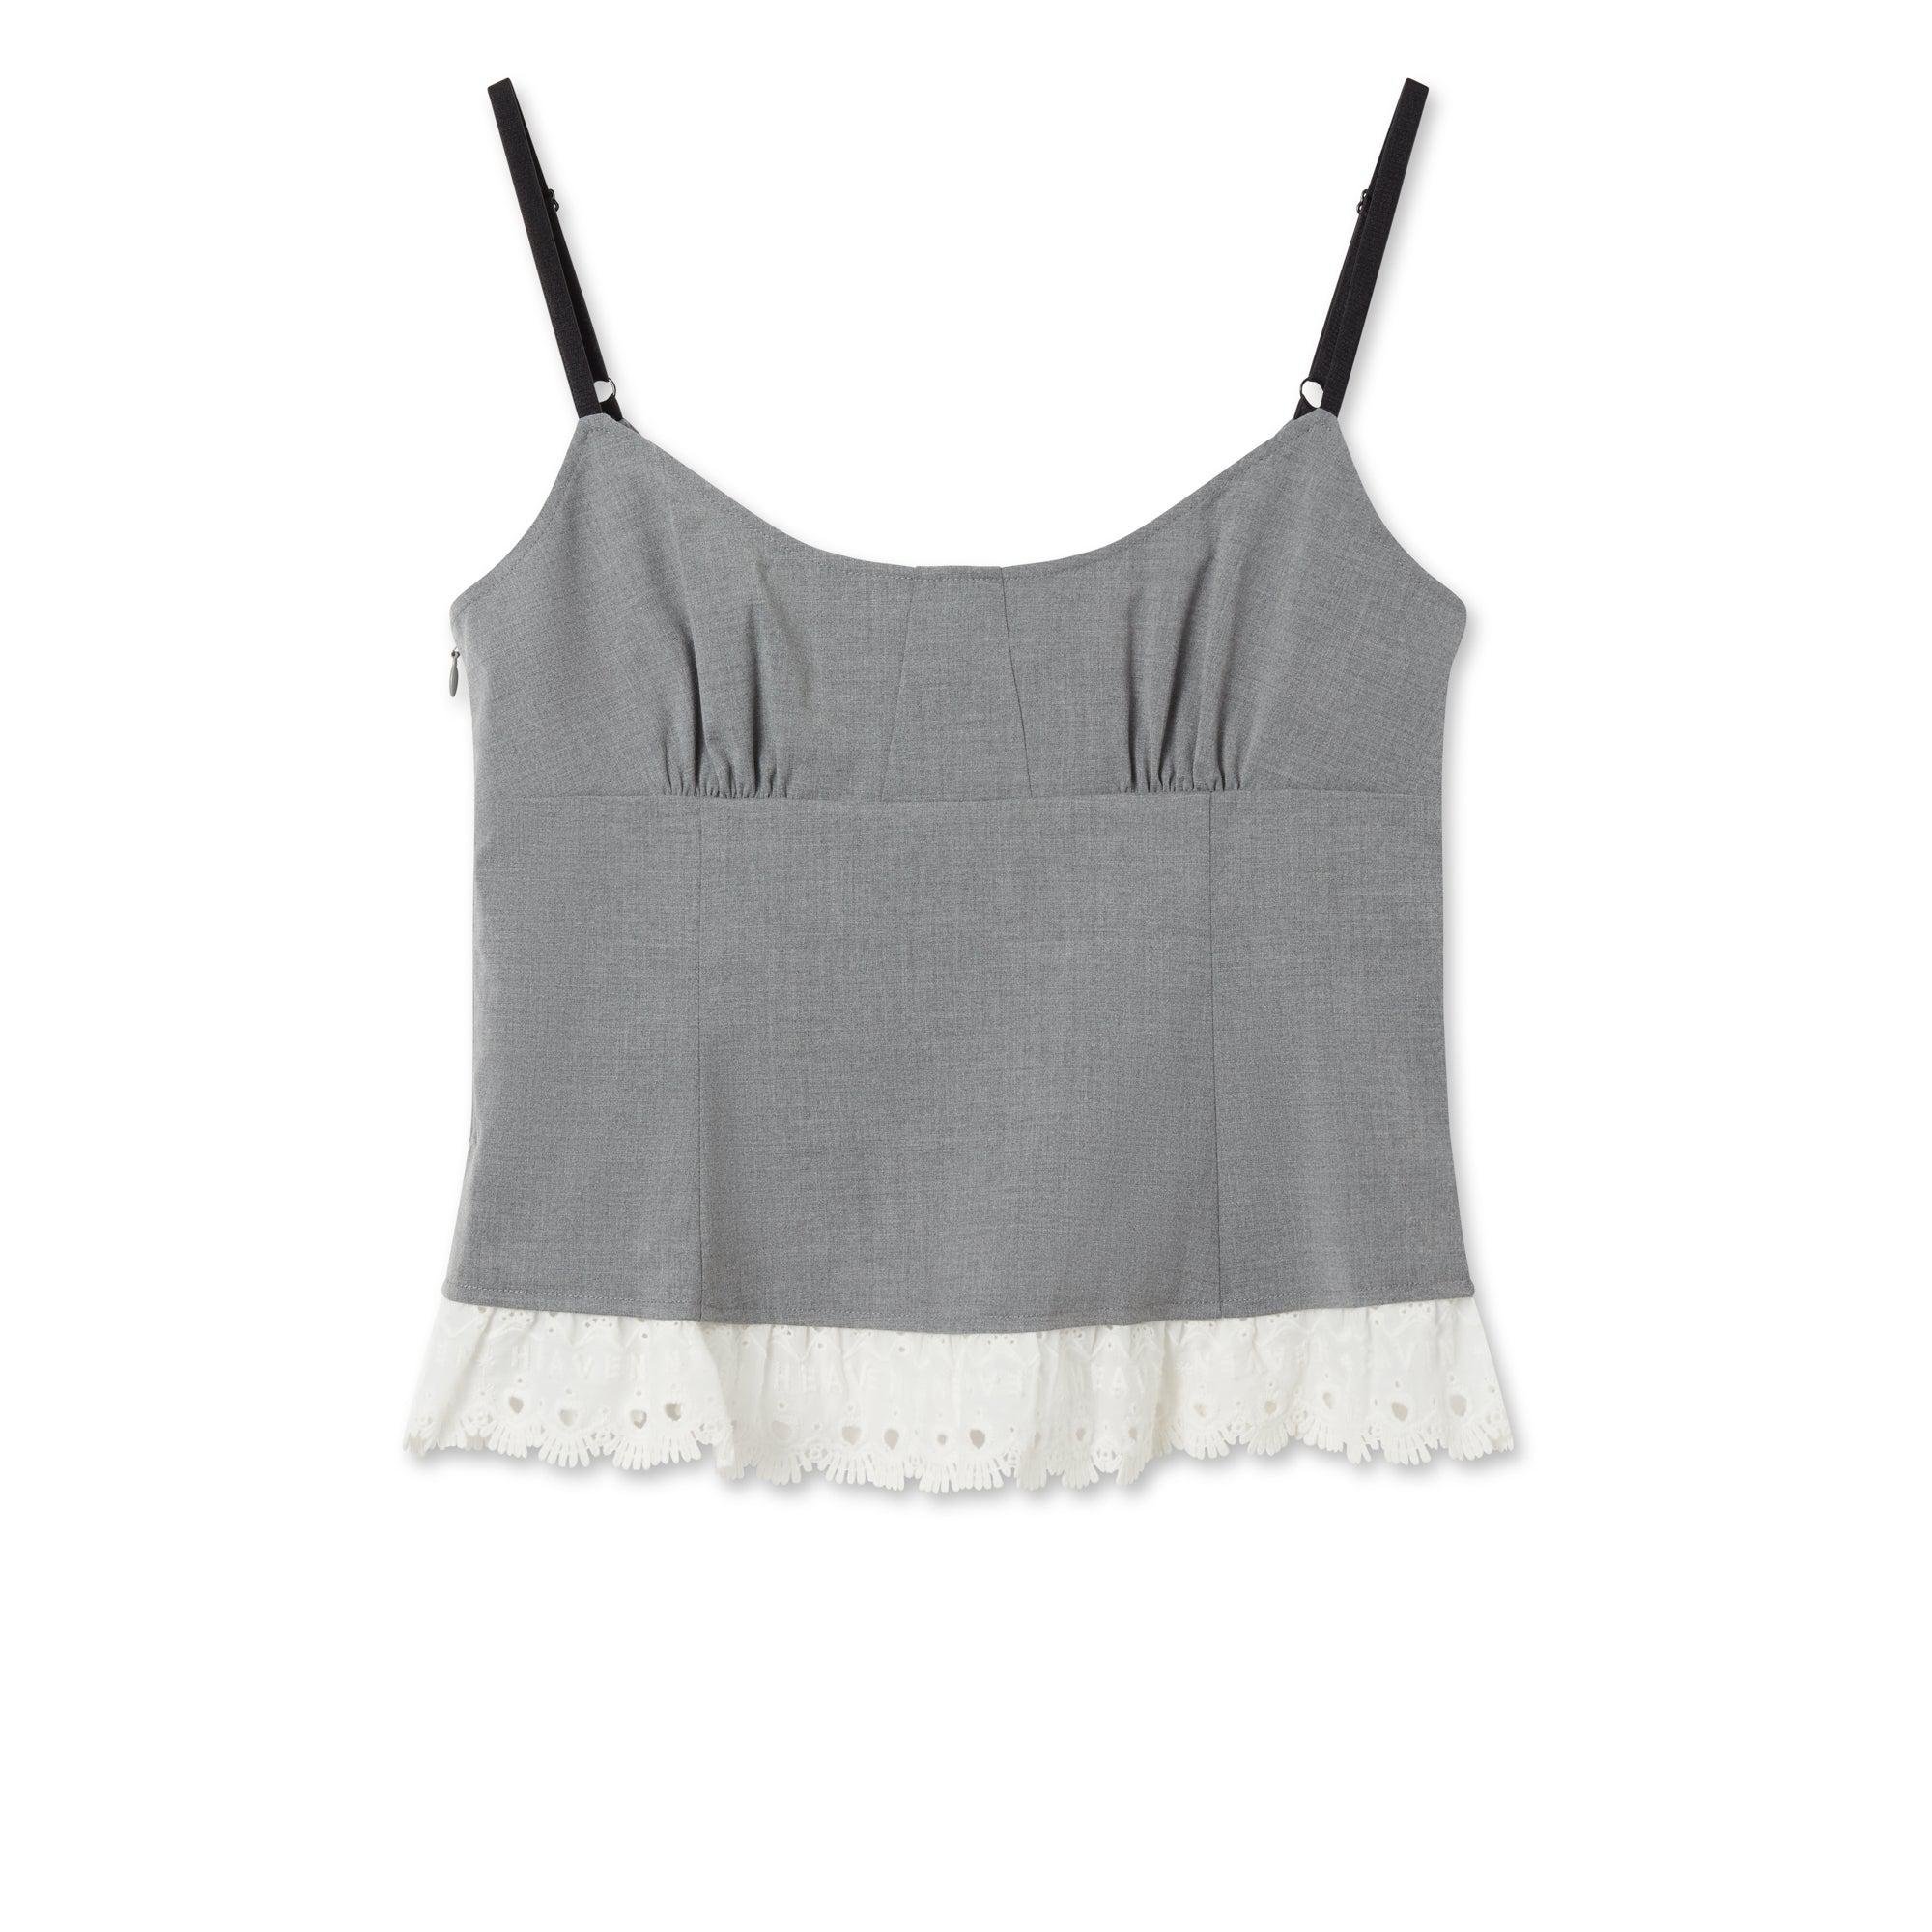 https://bcdn-images.hotdata.cc/images/products/MARC-JACOBS-HEAVEN-Heaven-by-Marc-Jacobs-Womens-Tailored-Lace-Camisole-Dark-Green-aae7fbc23db31398.jpg